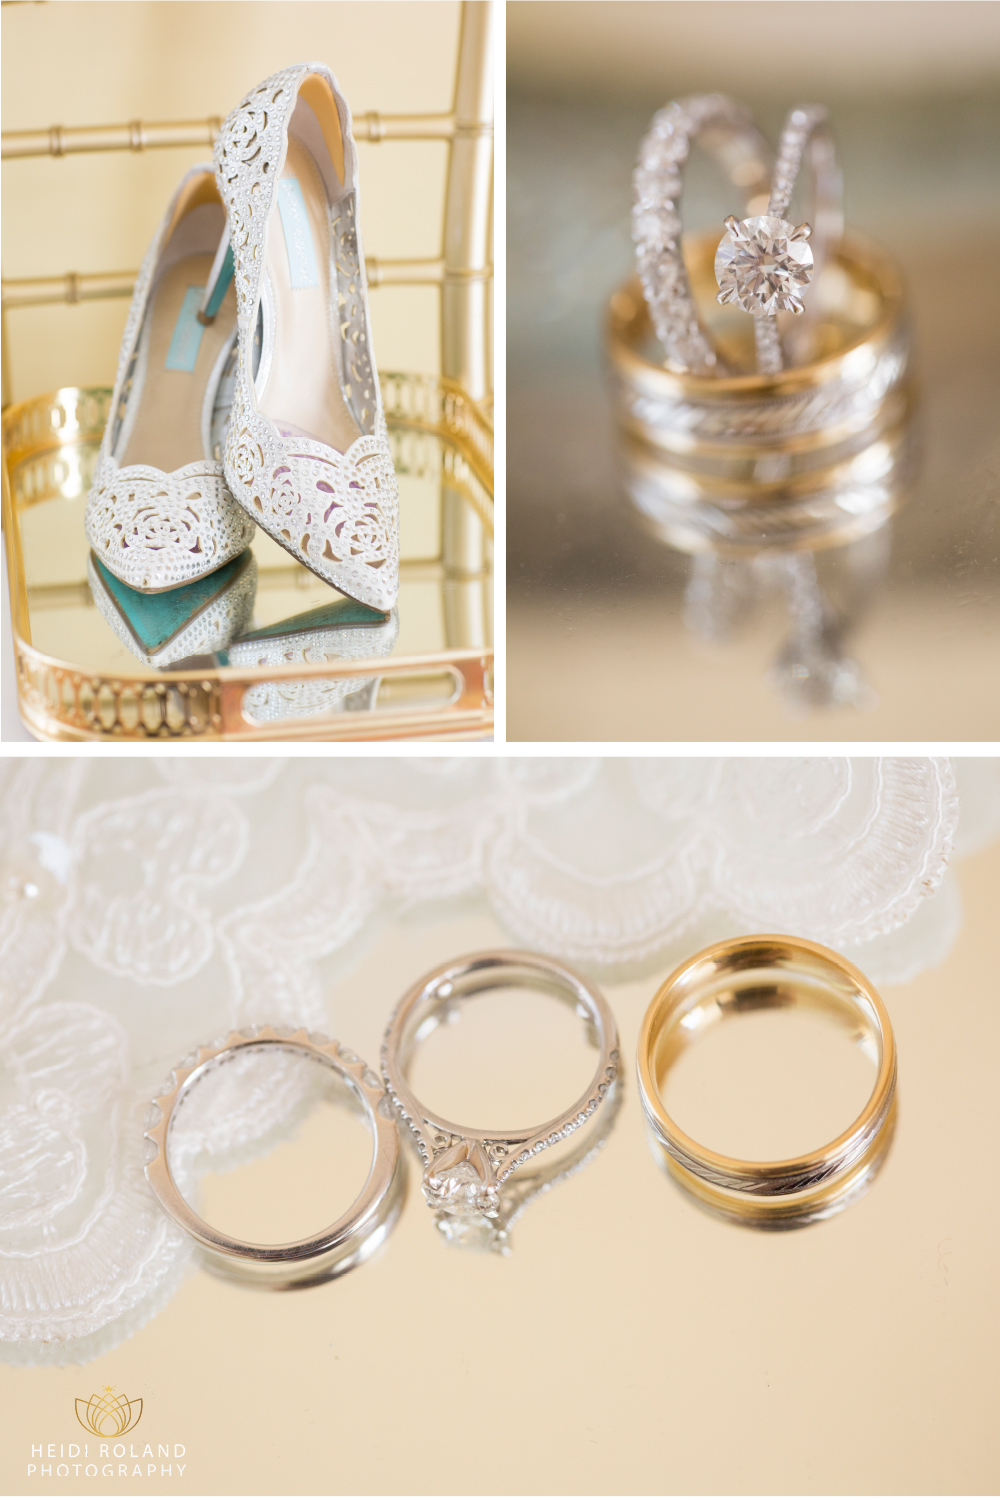 Bridal details at Spring Mill Manor Wedding, shoes and rings